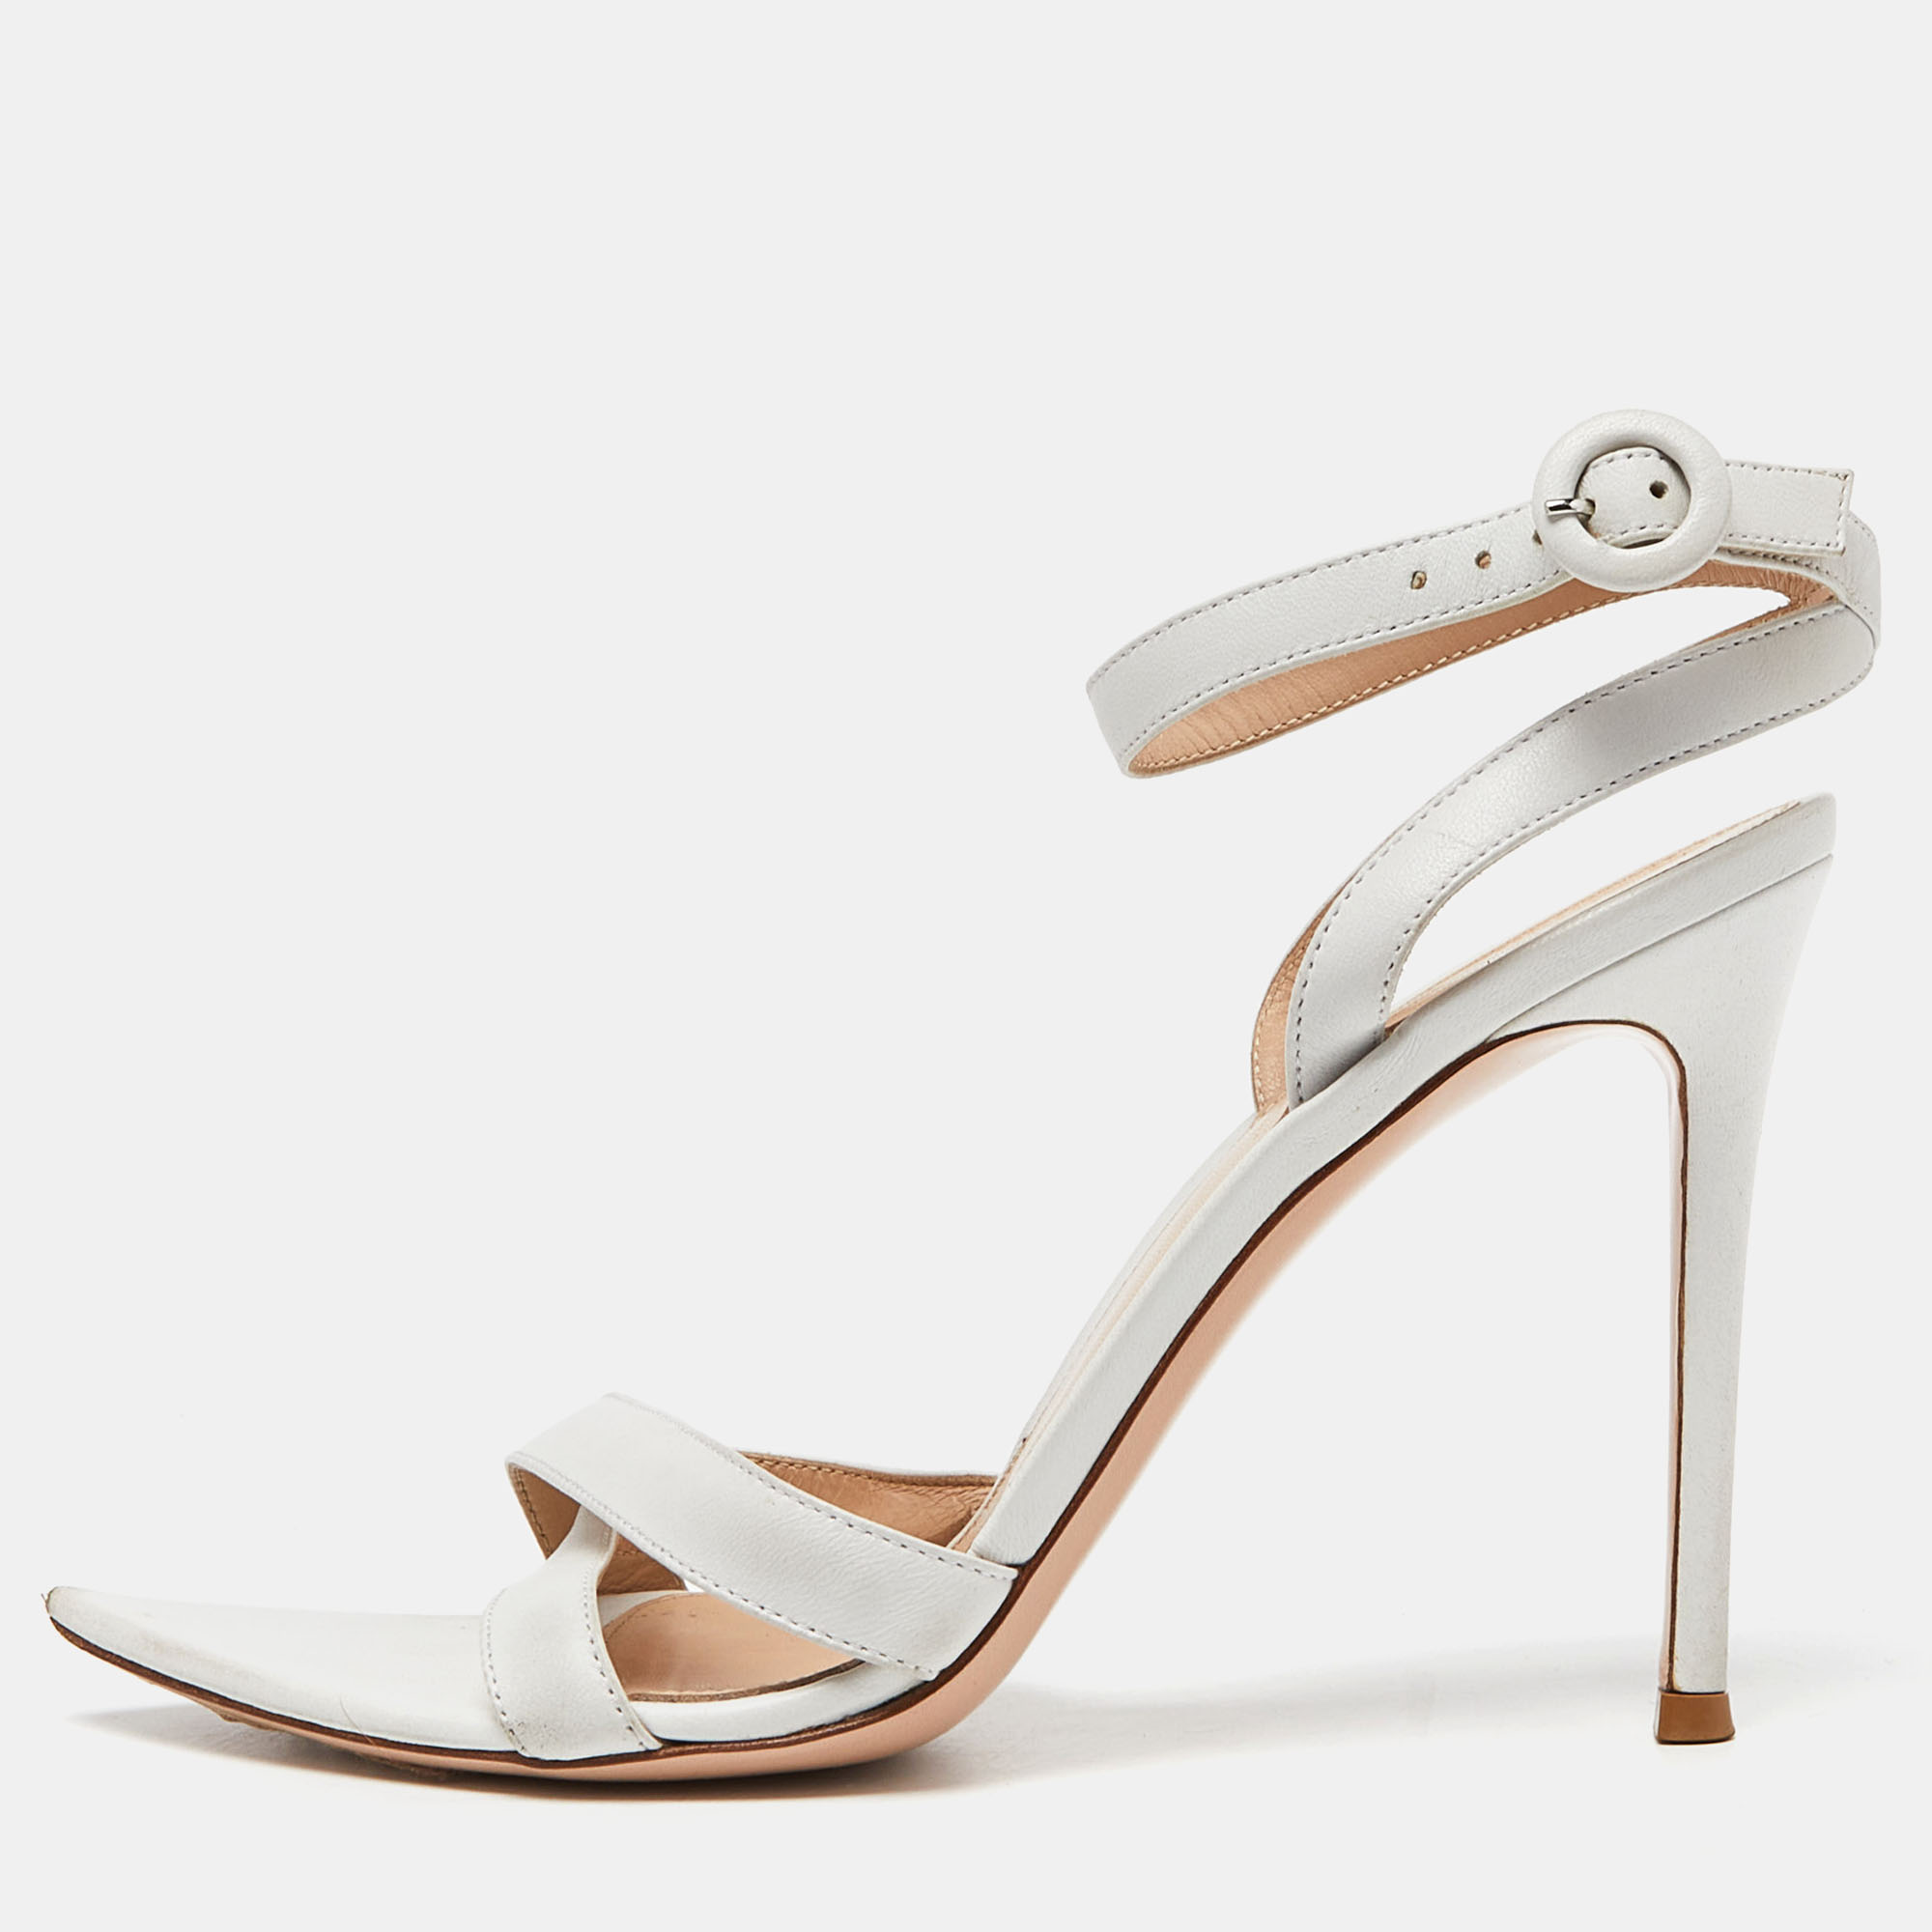 Pre-owned Gianvito Rossi White Leather Ankle Strap Sandals Size 38.5